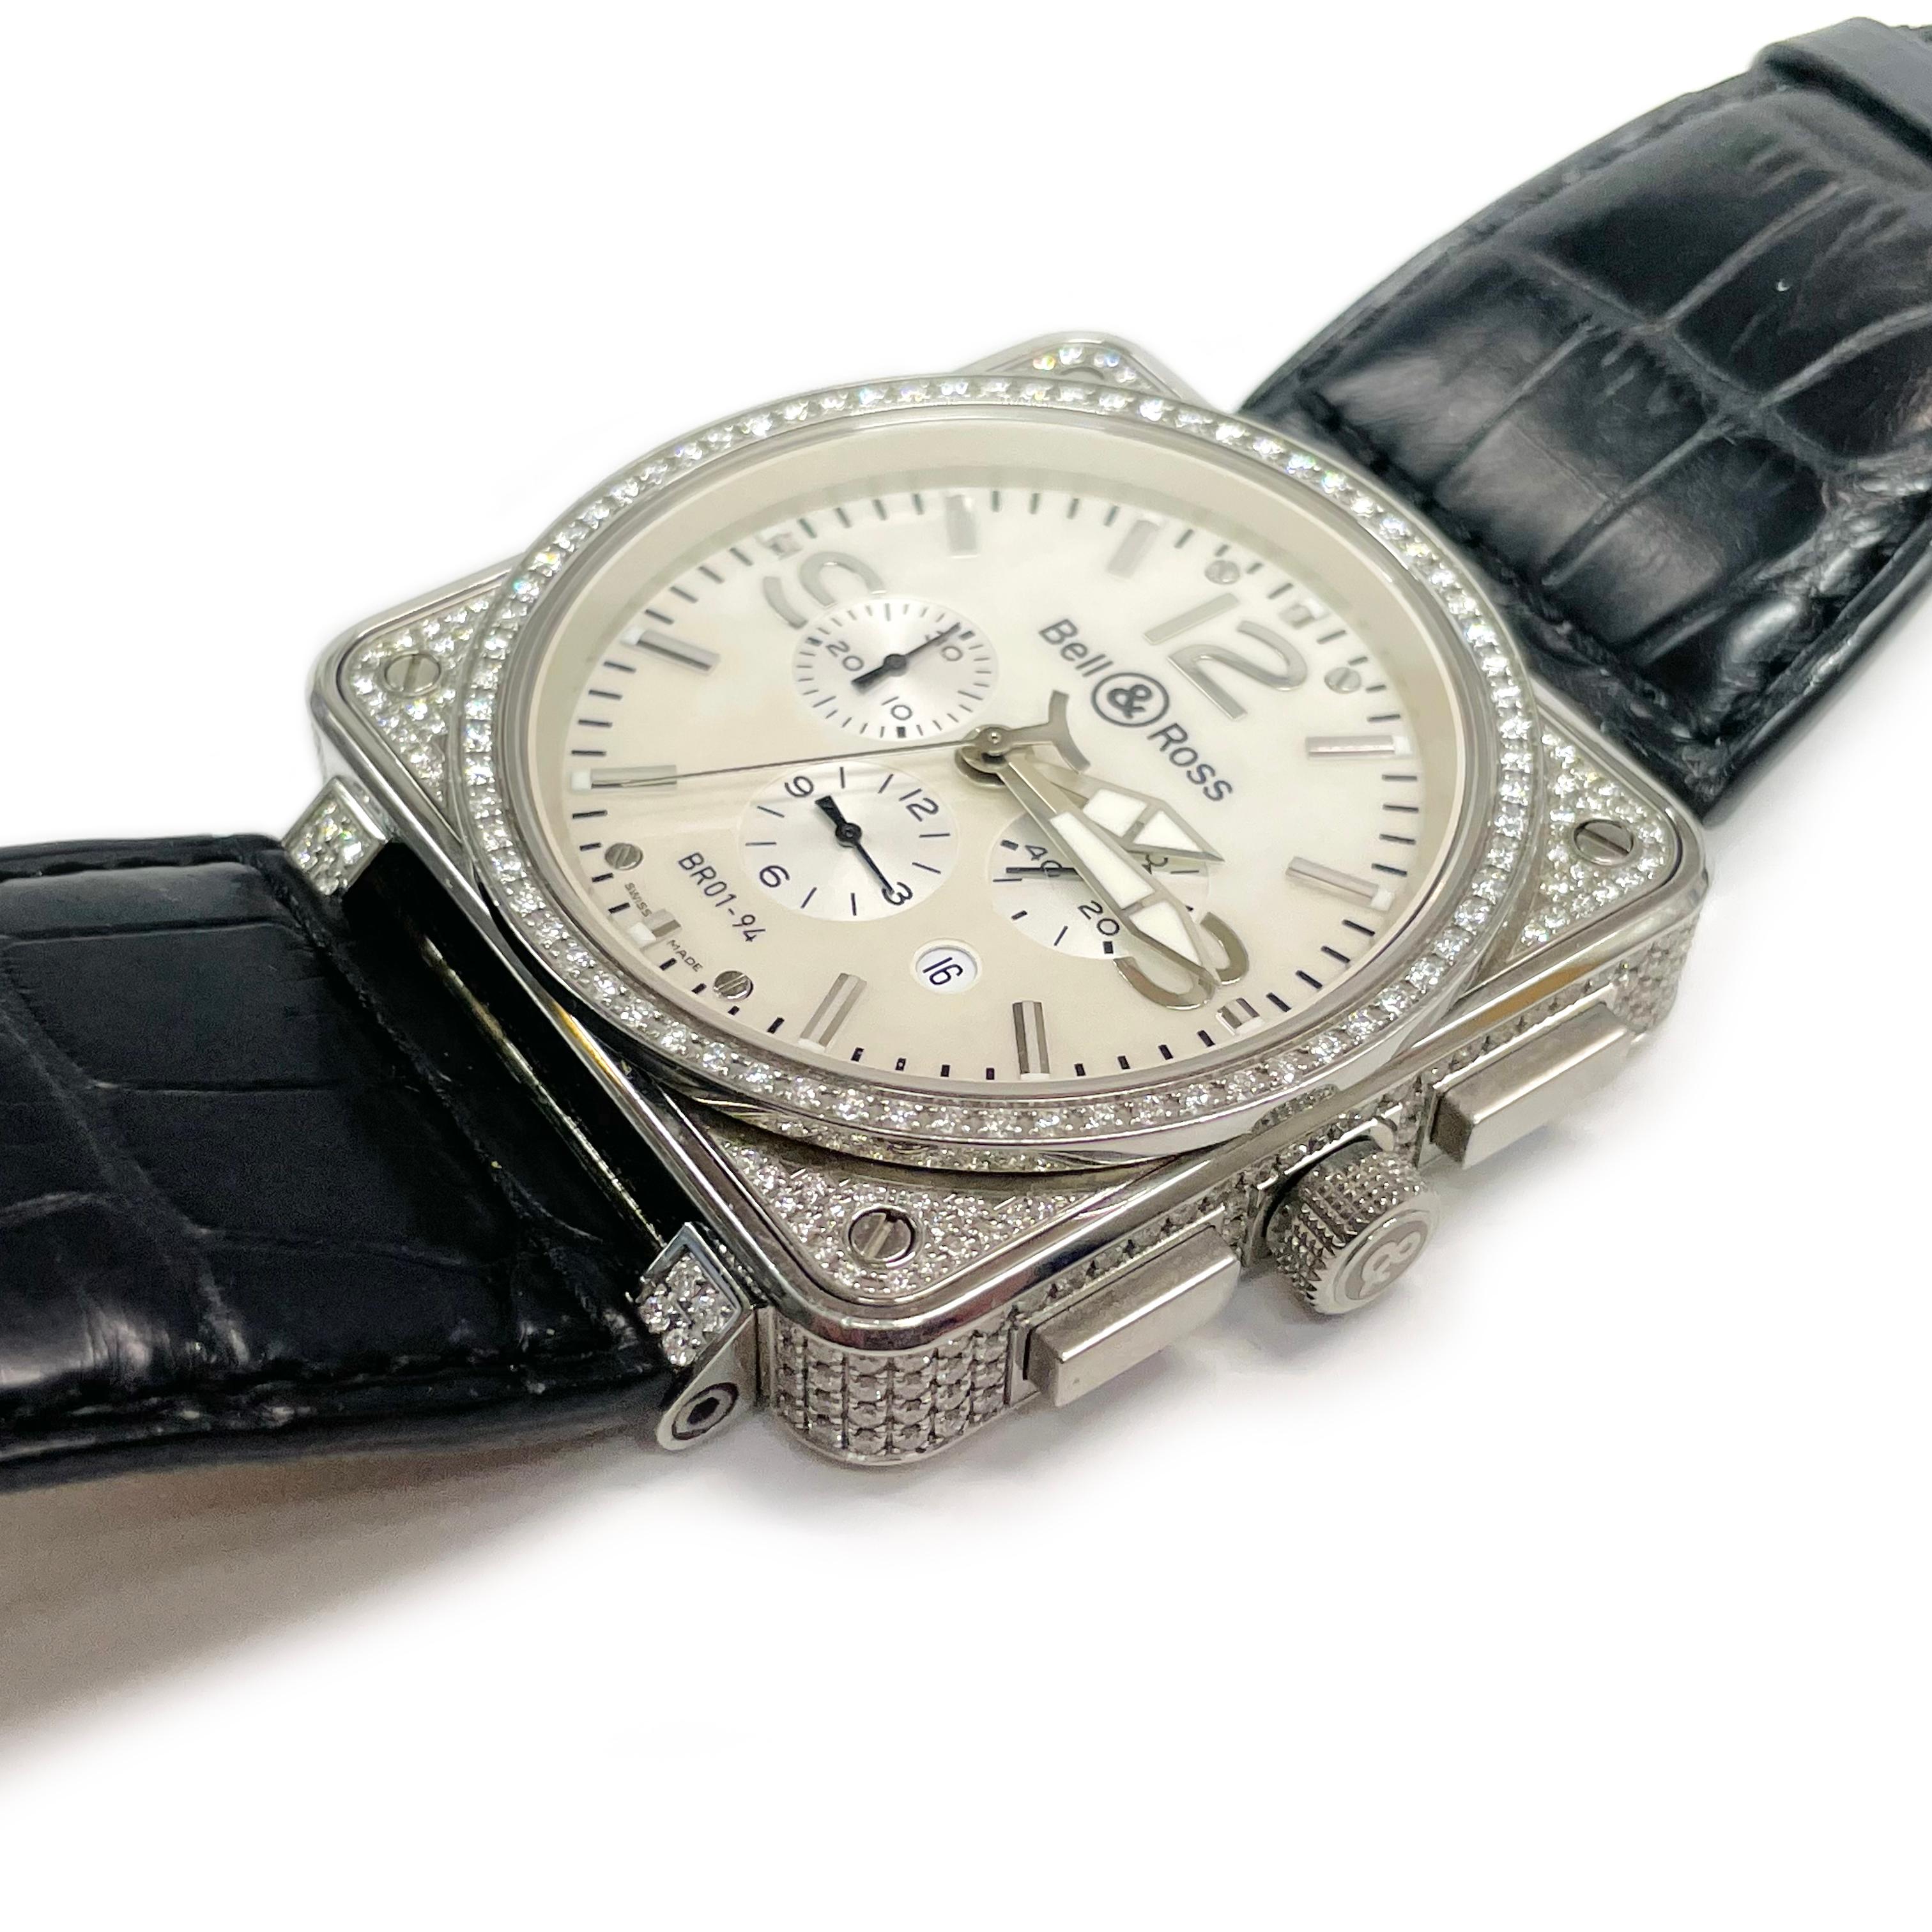 Bell & Ross Diamond automatic movement wristwatch. The oversized watch features a mother-of-pearl dial, diamond bezel case, hour, minute, and second hands. On the back of the case reads Chronograph Stainless Steel Automatic Movement Water Resistant: